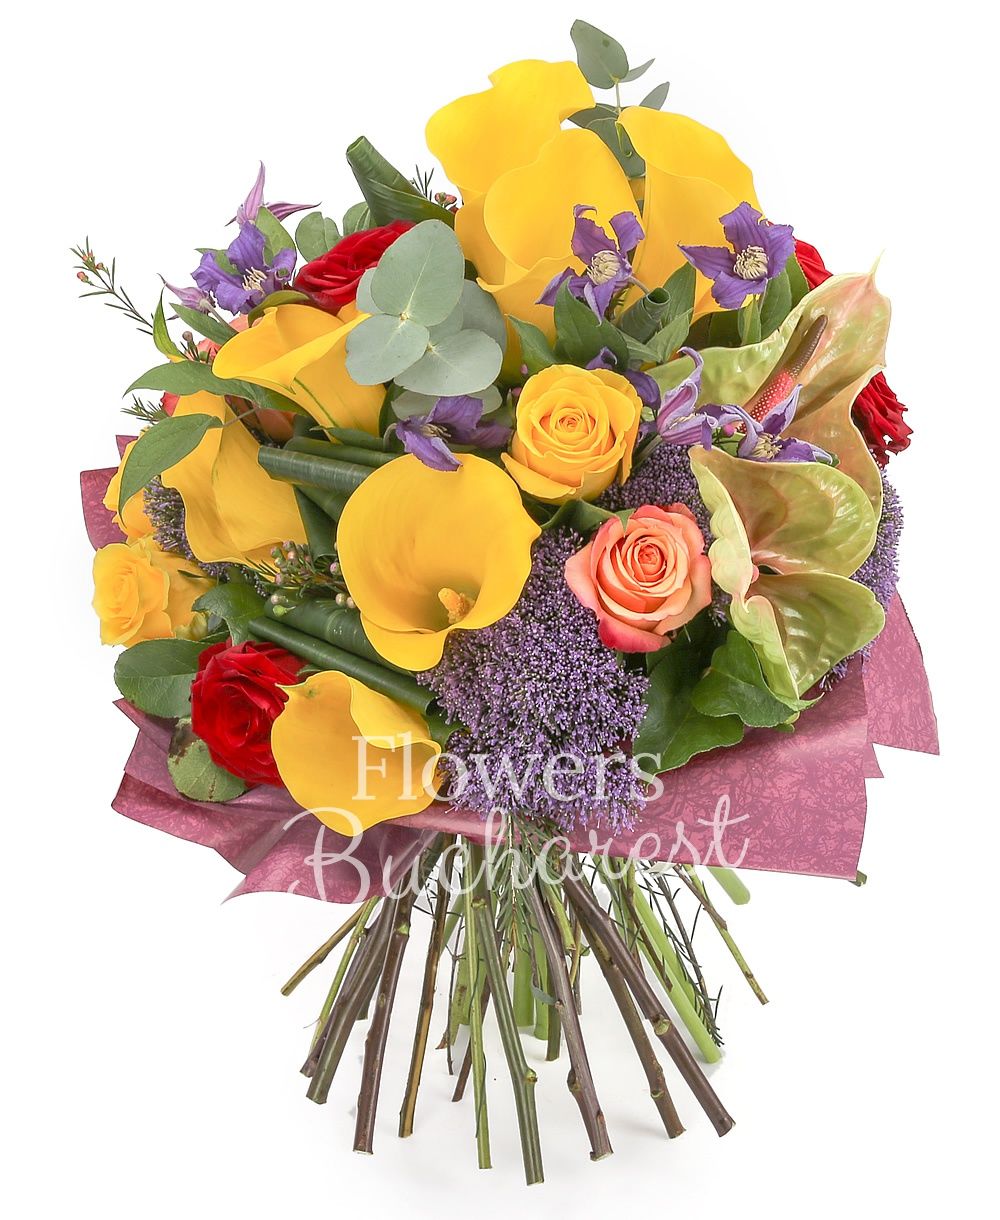 5 yellow cala, 4 red roses, 5 yellow roses, 3 orange roses, 3 clematis, 2 green anthurium, 2 pink waxflower, 3 mauve trachelium, greenery